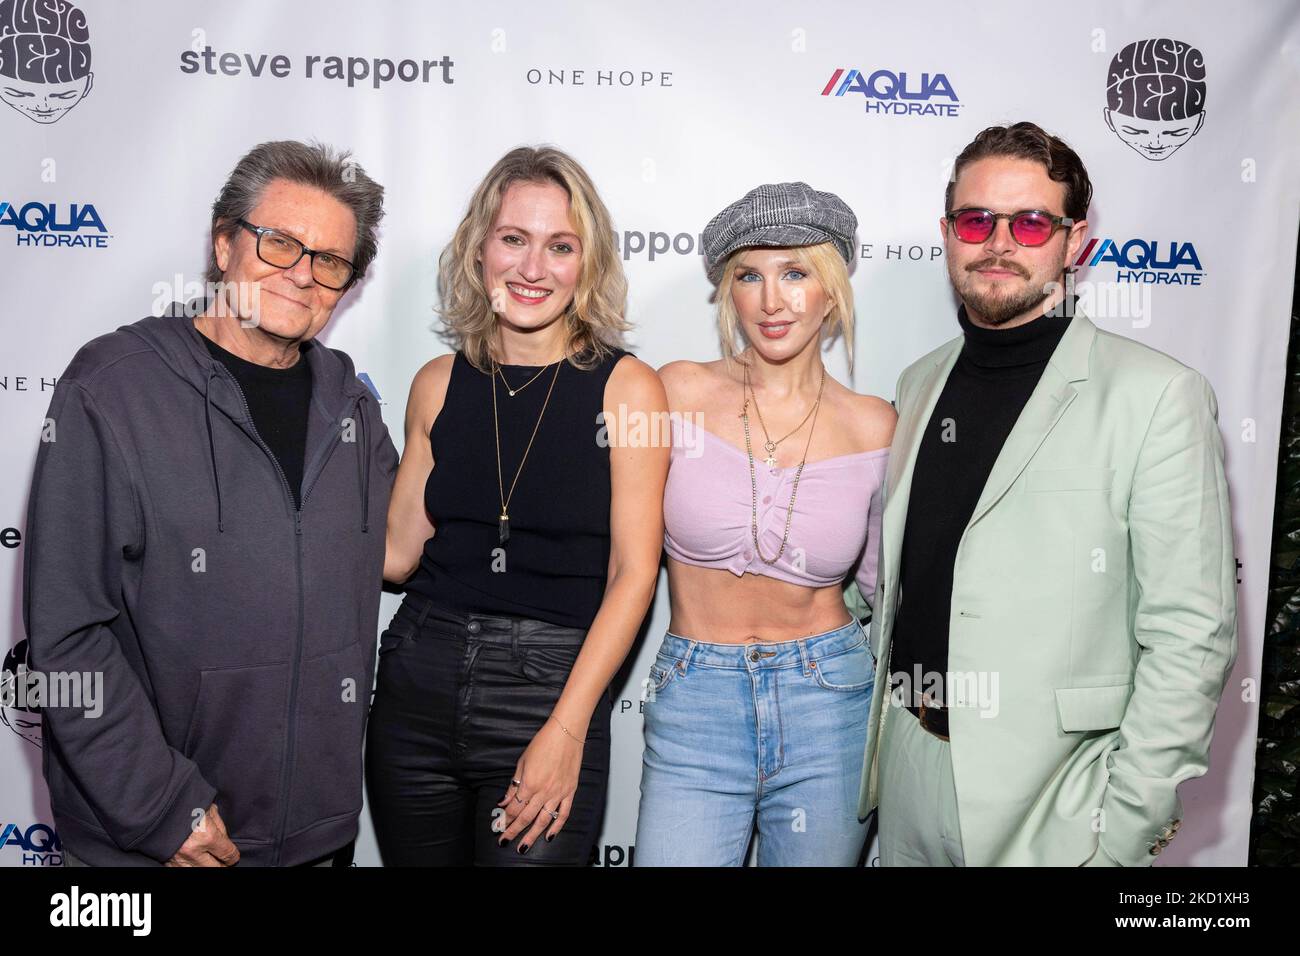 Hollywood, USA. 04th Nov, 2022. Scott Page, Nika Khitrova, Erin Gavin, Tommy Smith attend Rock Photographer Steve Rapport Photo Exhibition VIP Reception at Musichead Gallery, Hollywood, CA, November 4th 2022 Credit: Eugene Powers/Alamy Live News Stock Photo